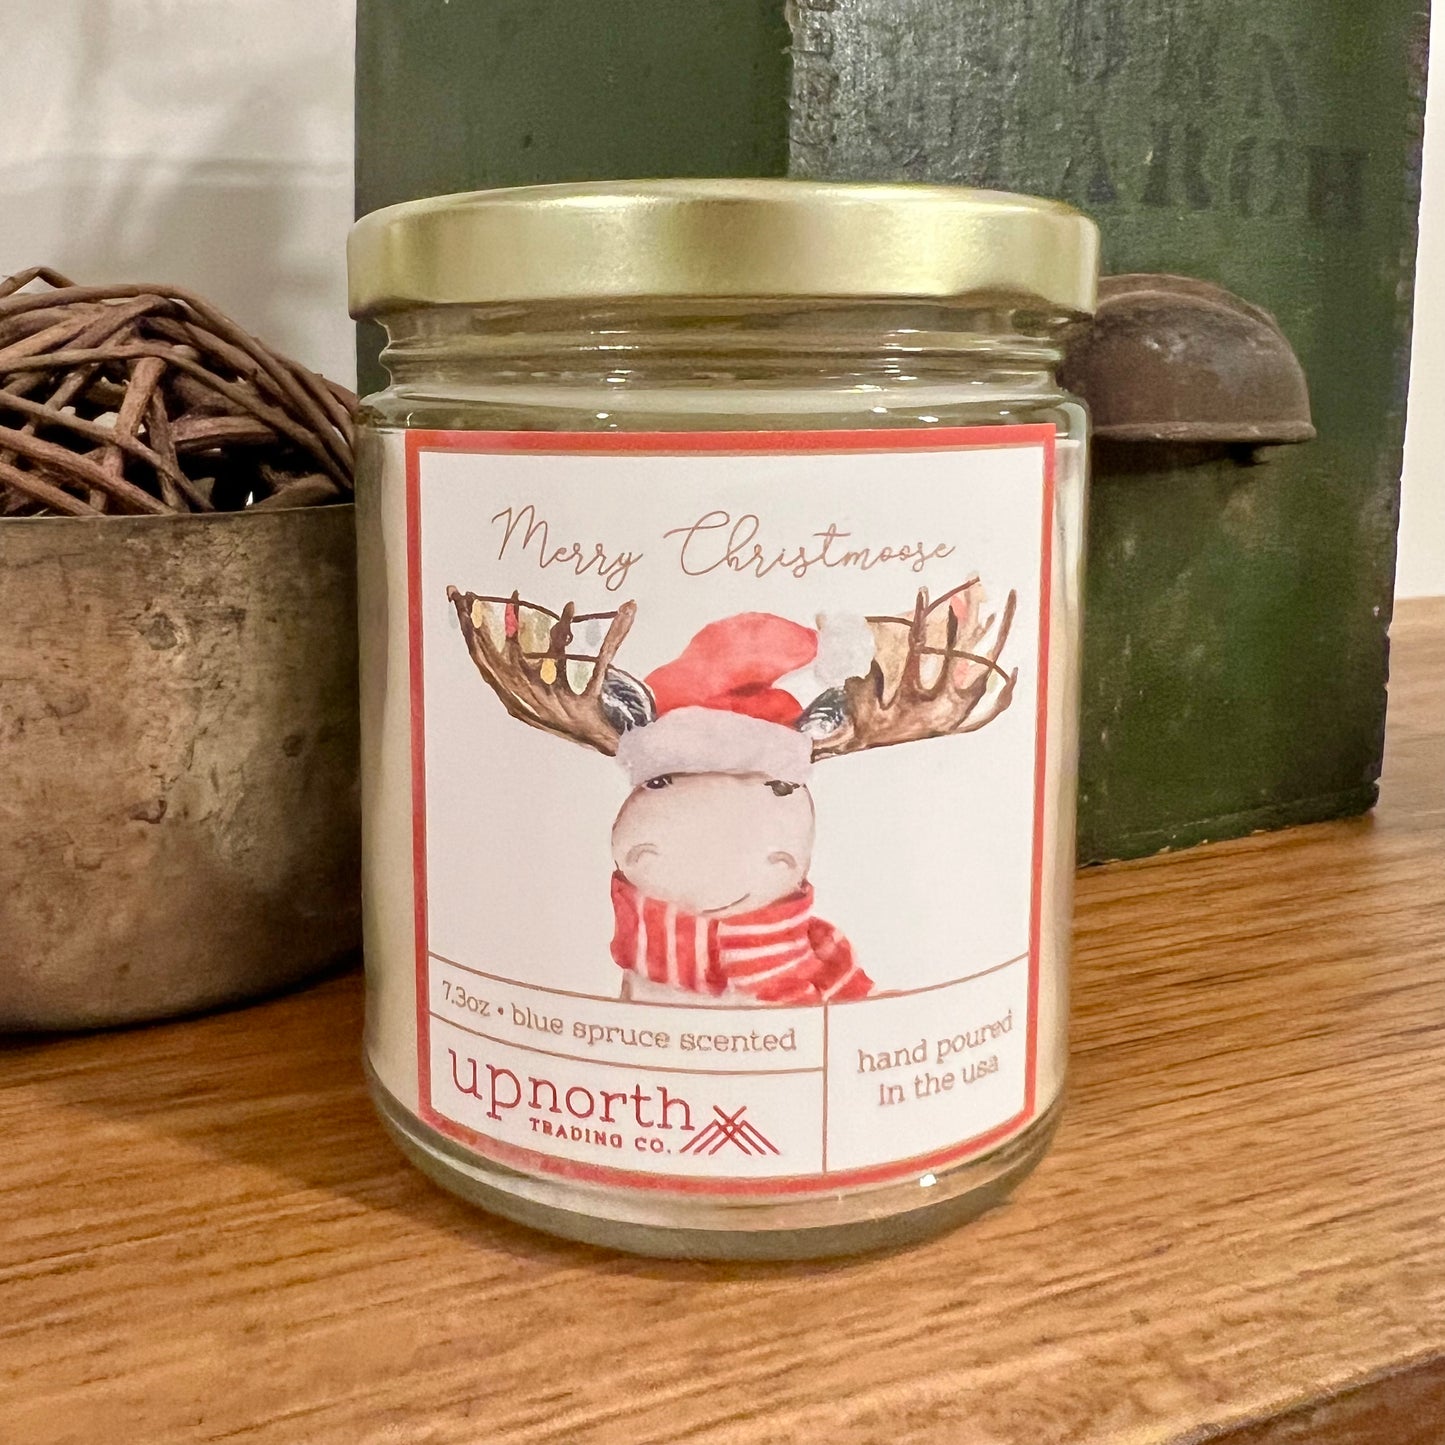 Merry Christ-moose Candle